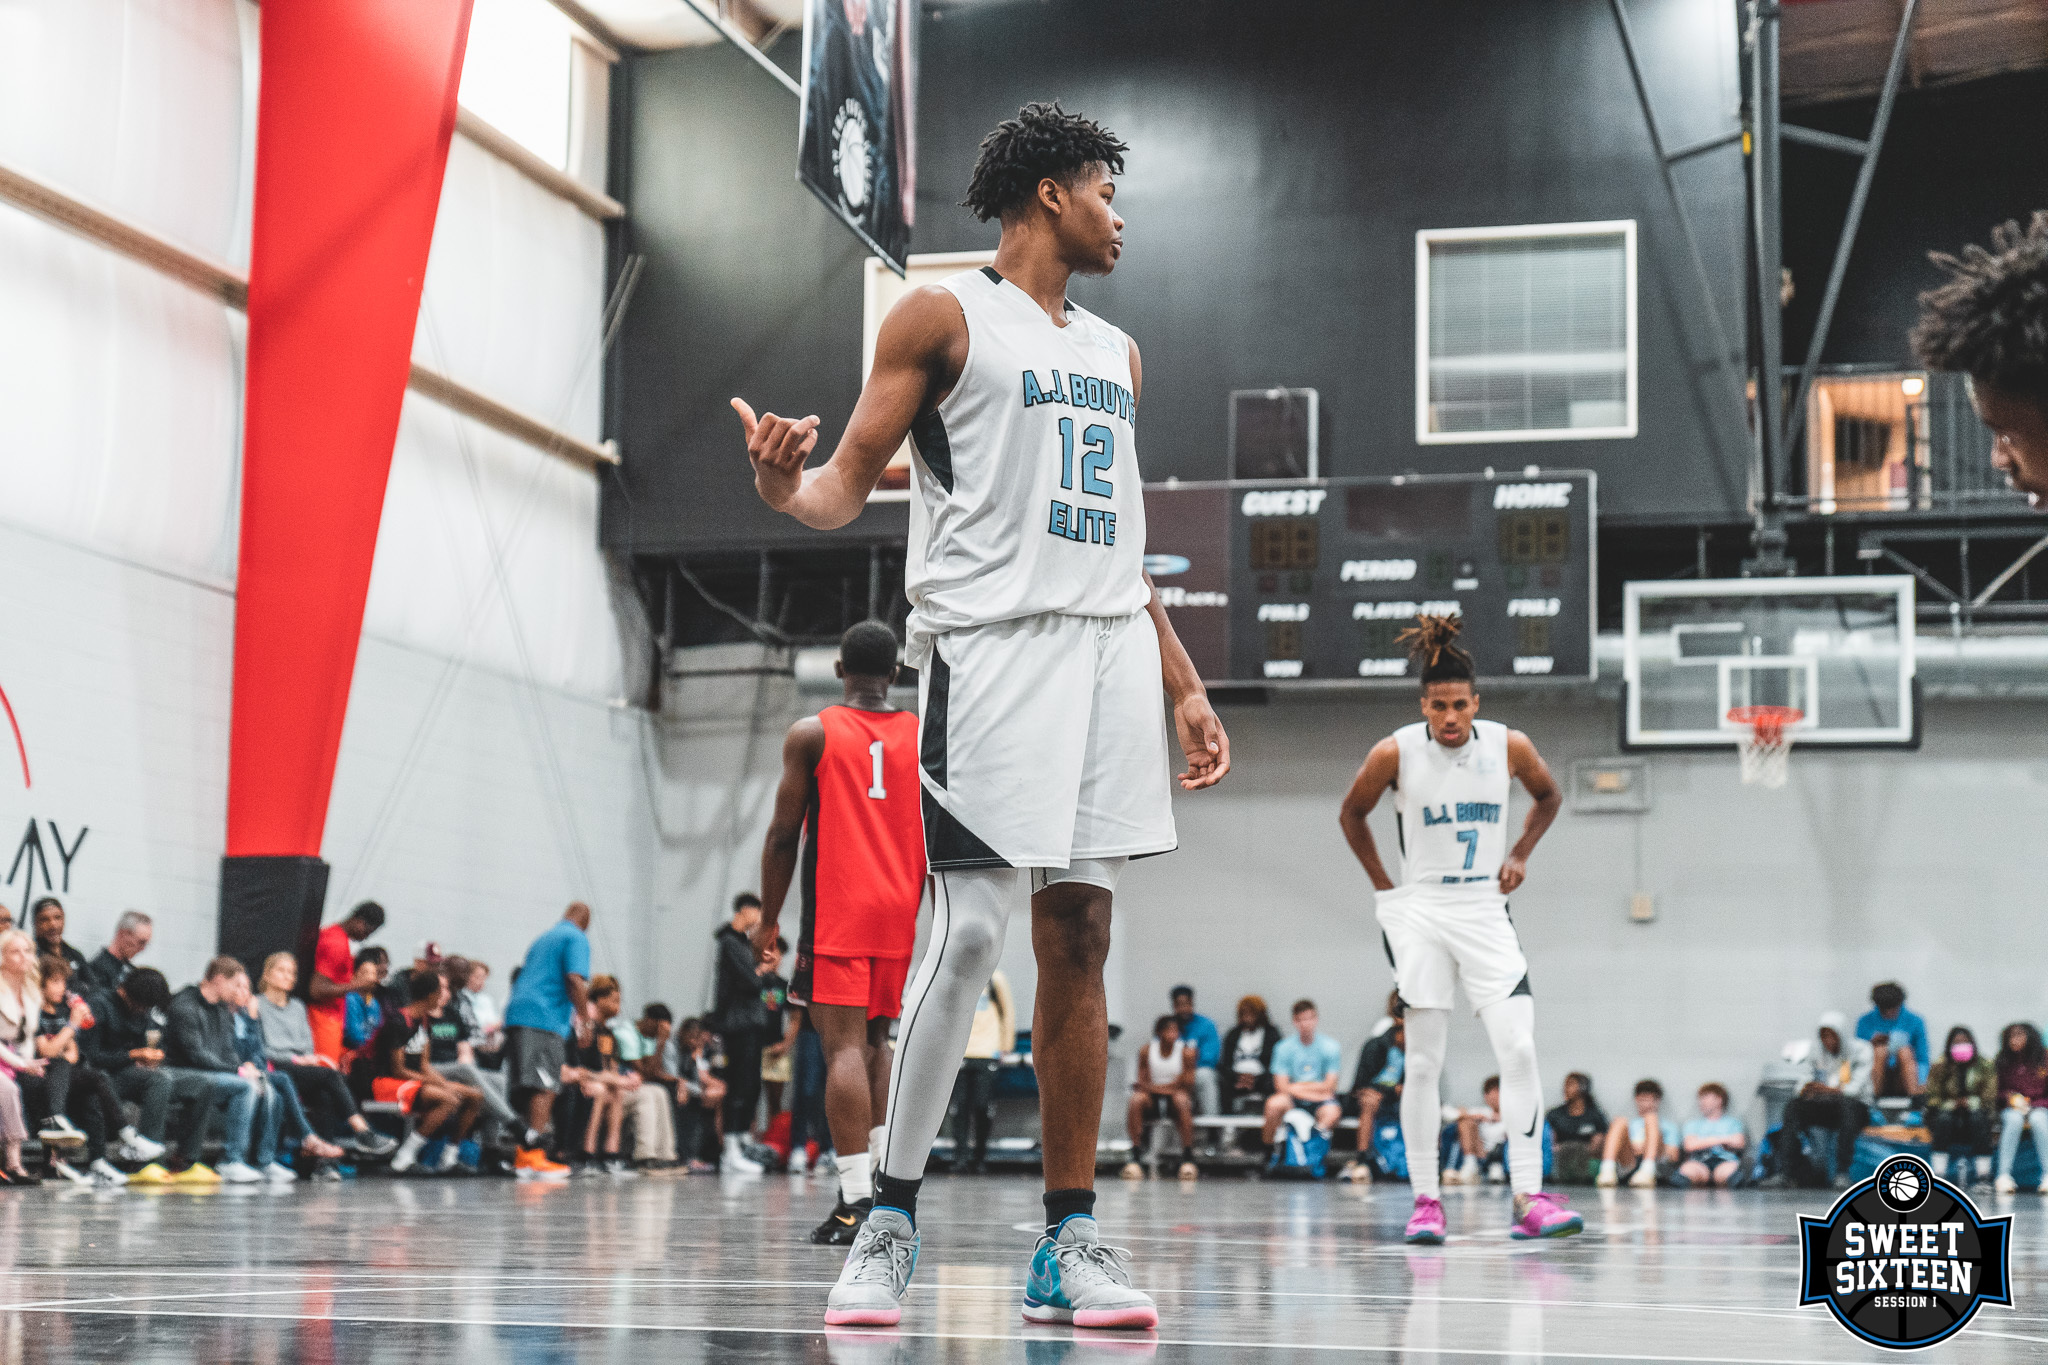 Standouts from On the Radar's Sweet Sixteen Session 1 (Part 2)